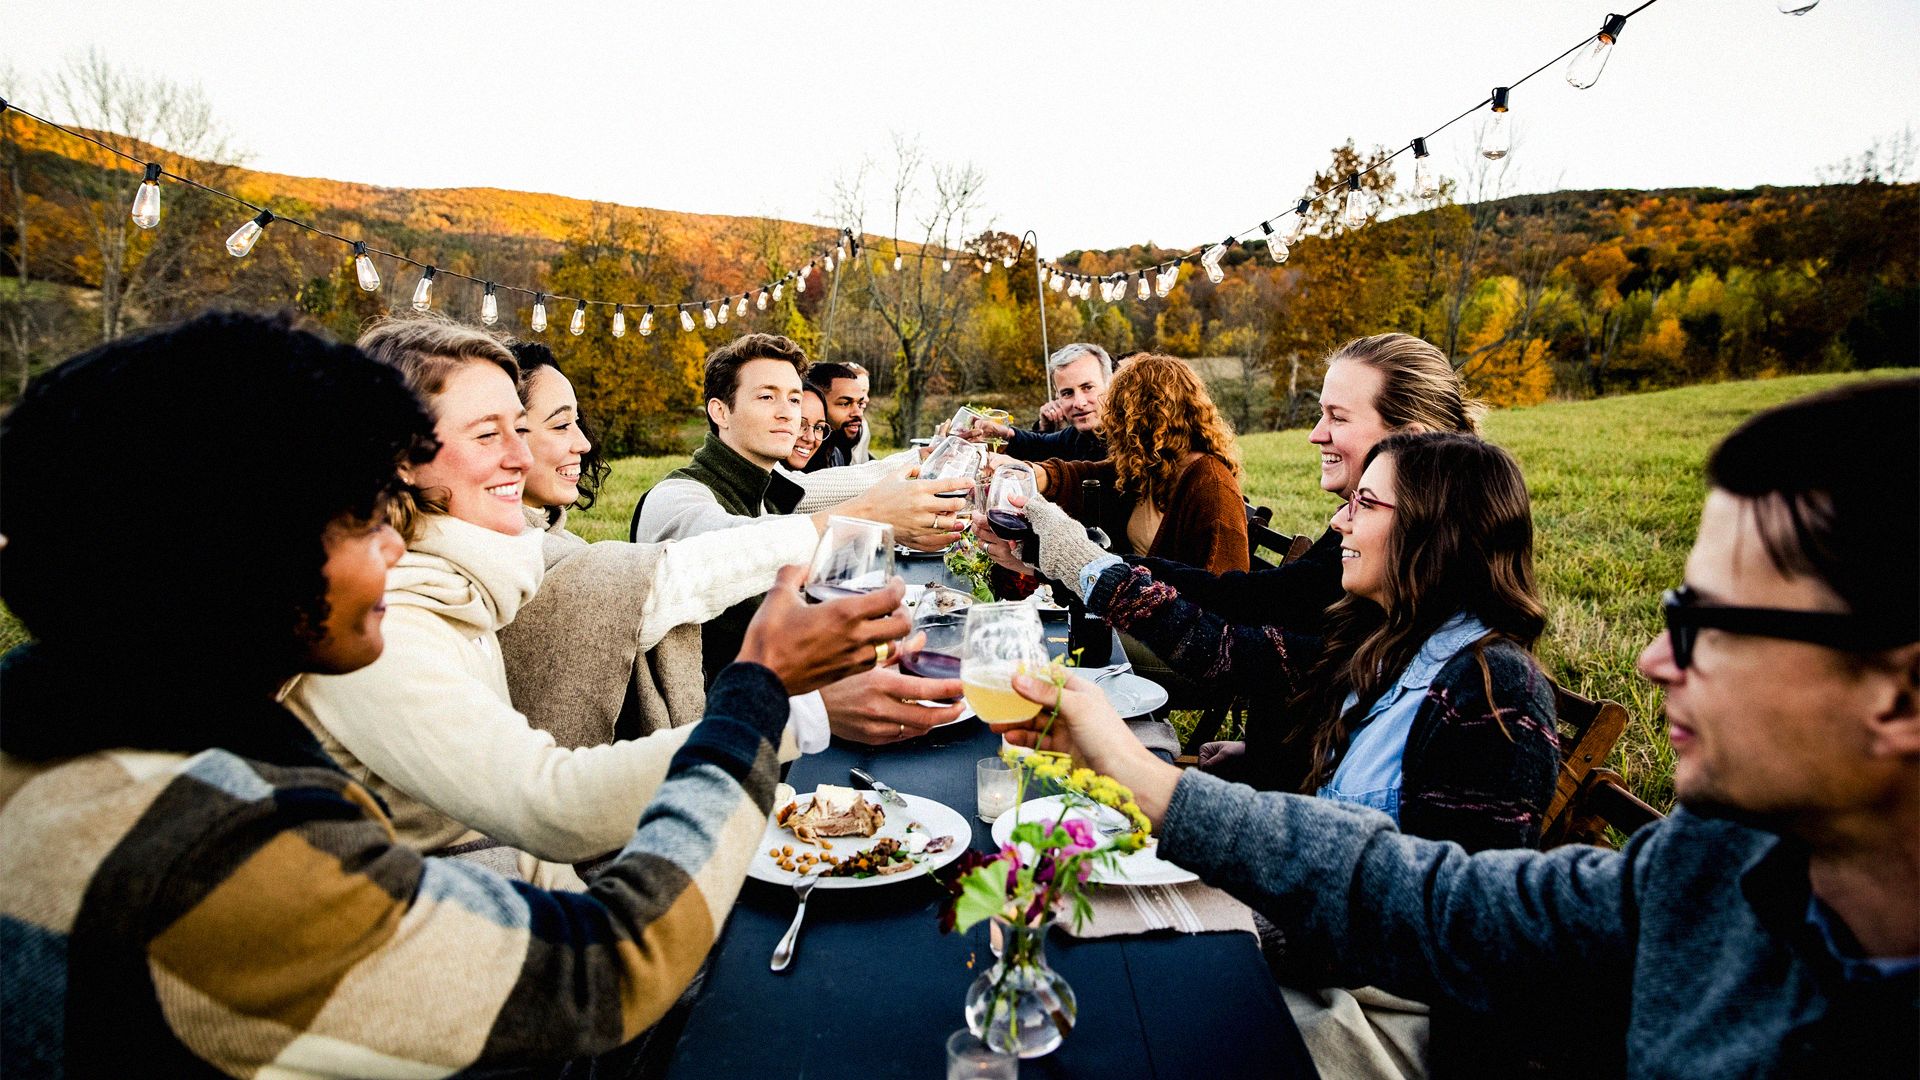  A group of people gathered around a long dinner table at a fall feast